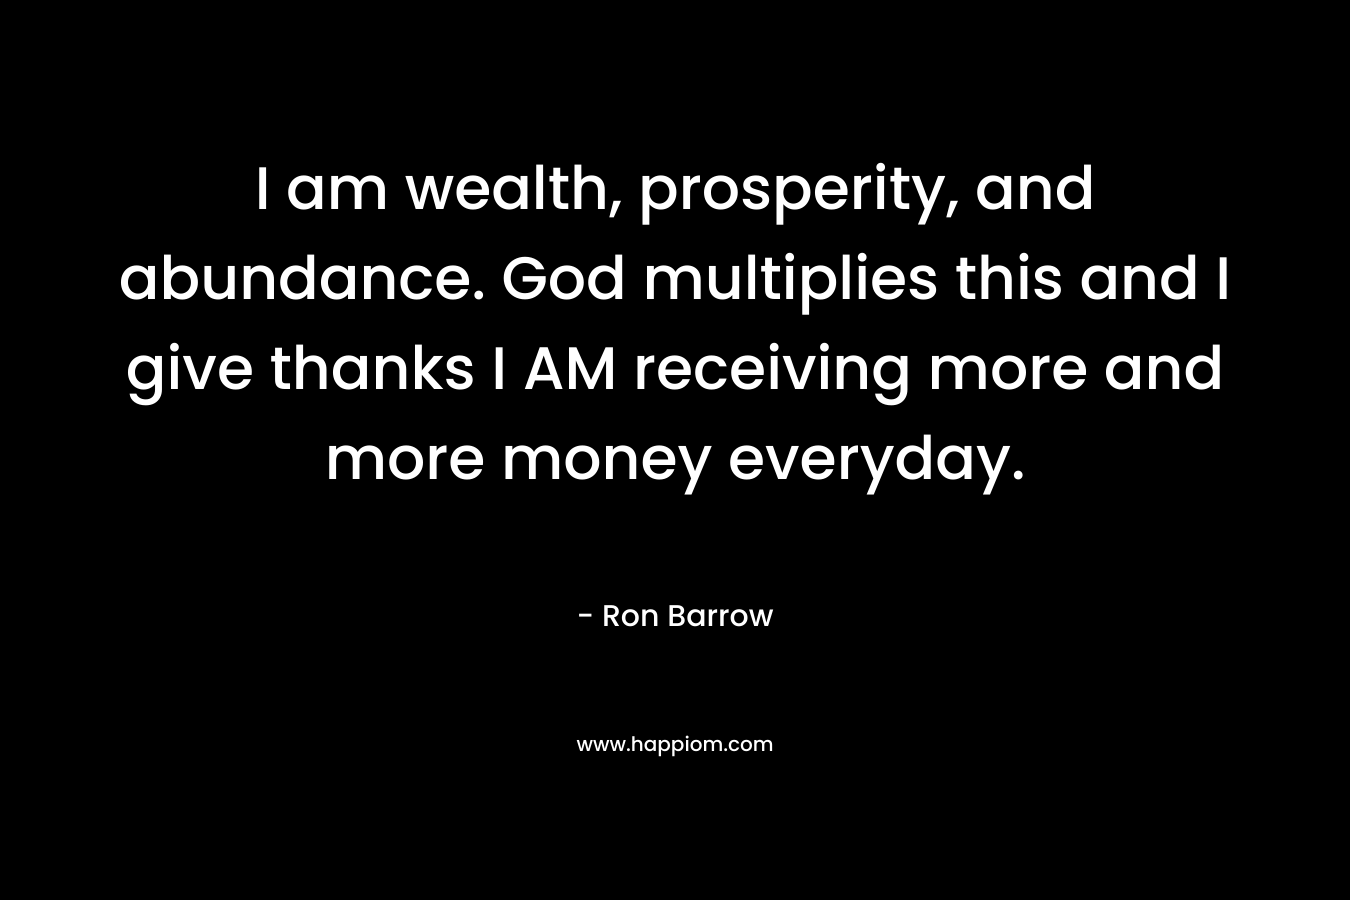 I am wealth, prosperity, and abundance. God multiplies this and I give thanks I AM receiving more and more money everyday. – Ron Barrow